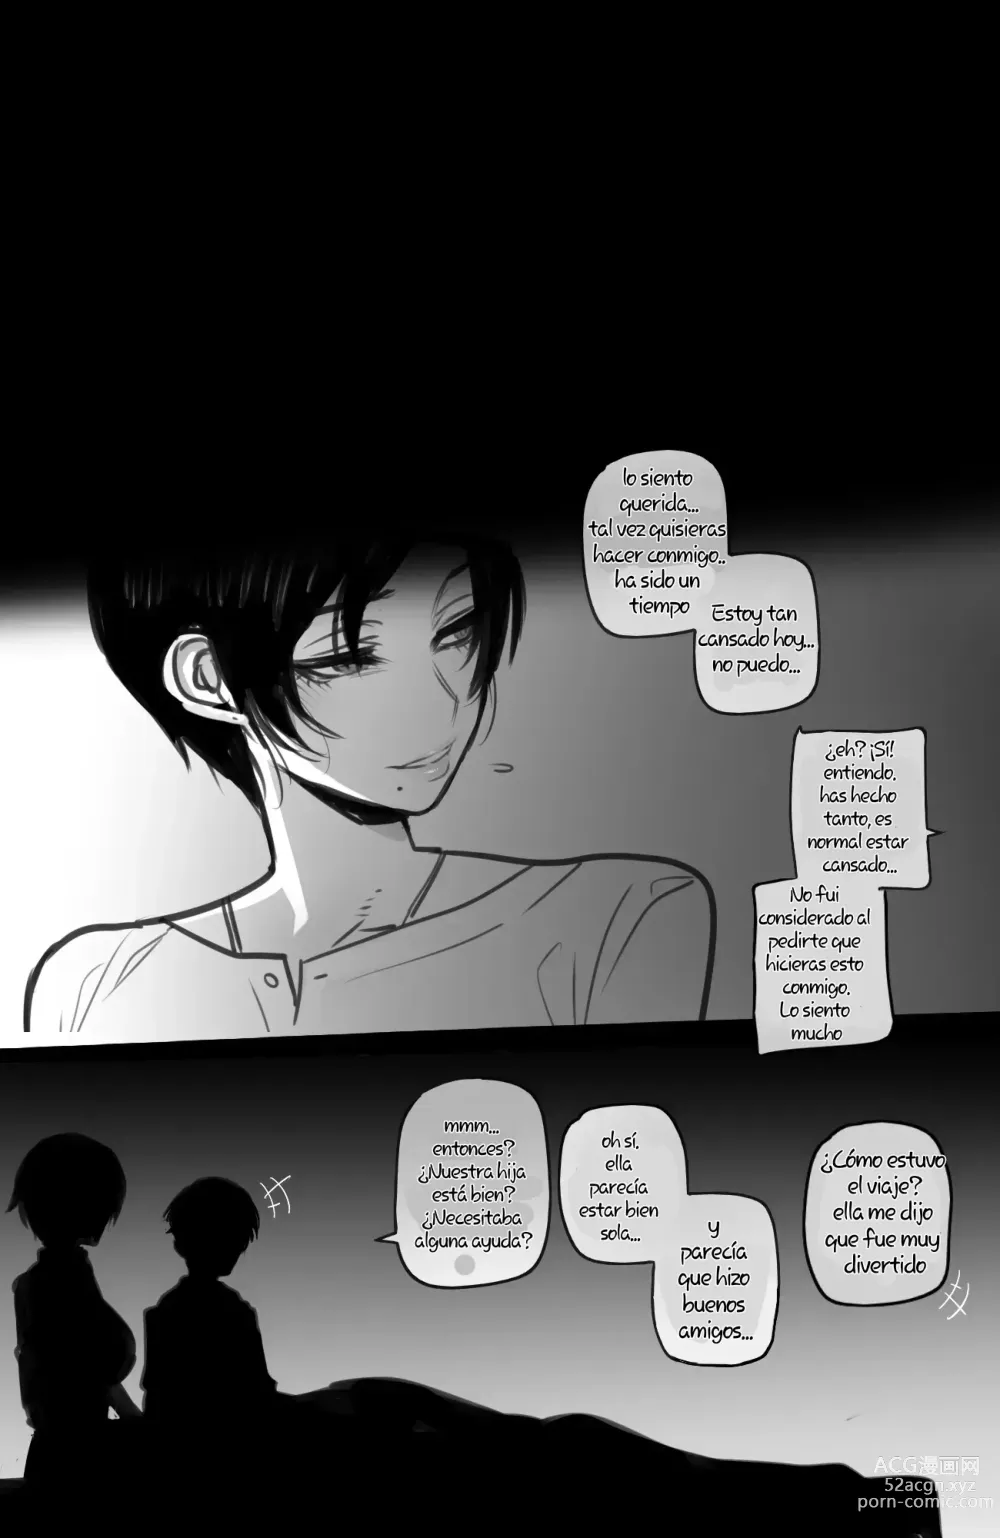 Page 104 of doujinshi Korean girl in america + monther and daugther BCC corruption